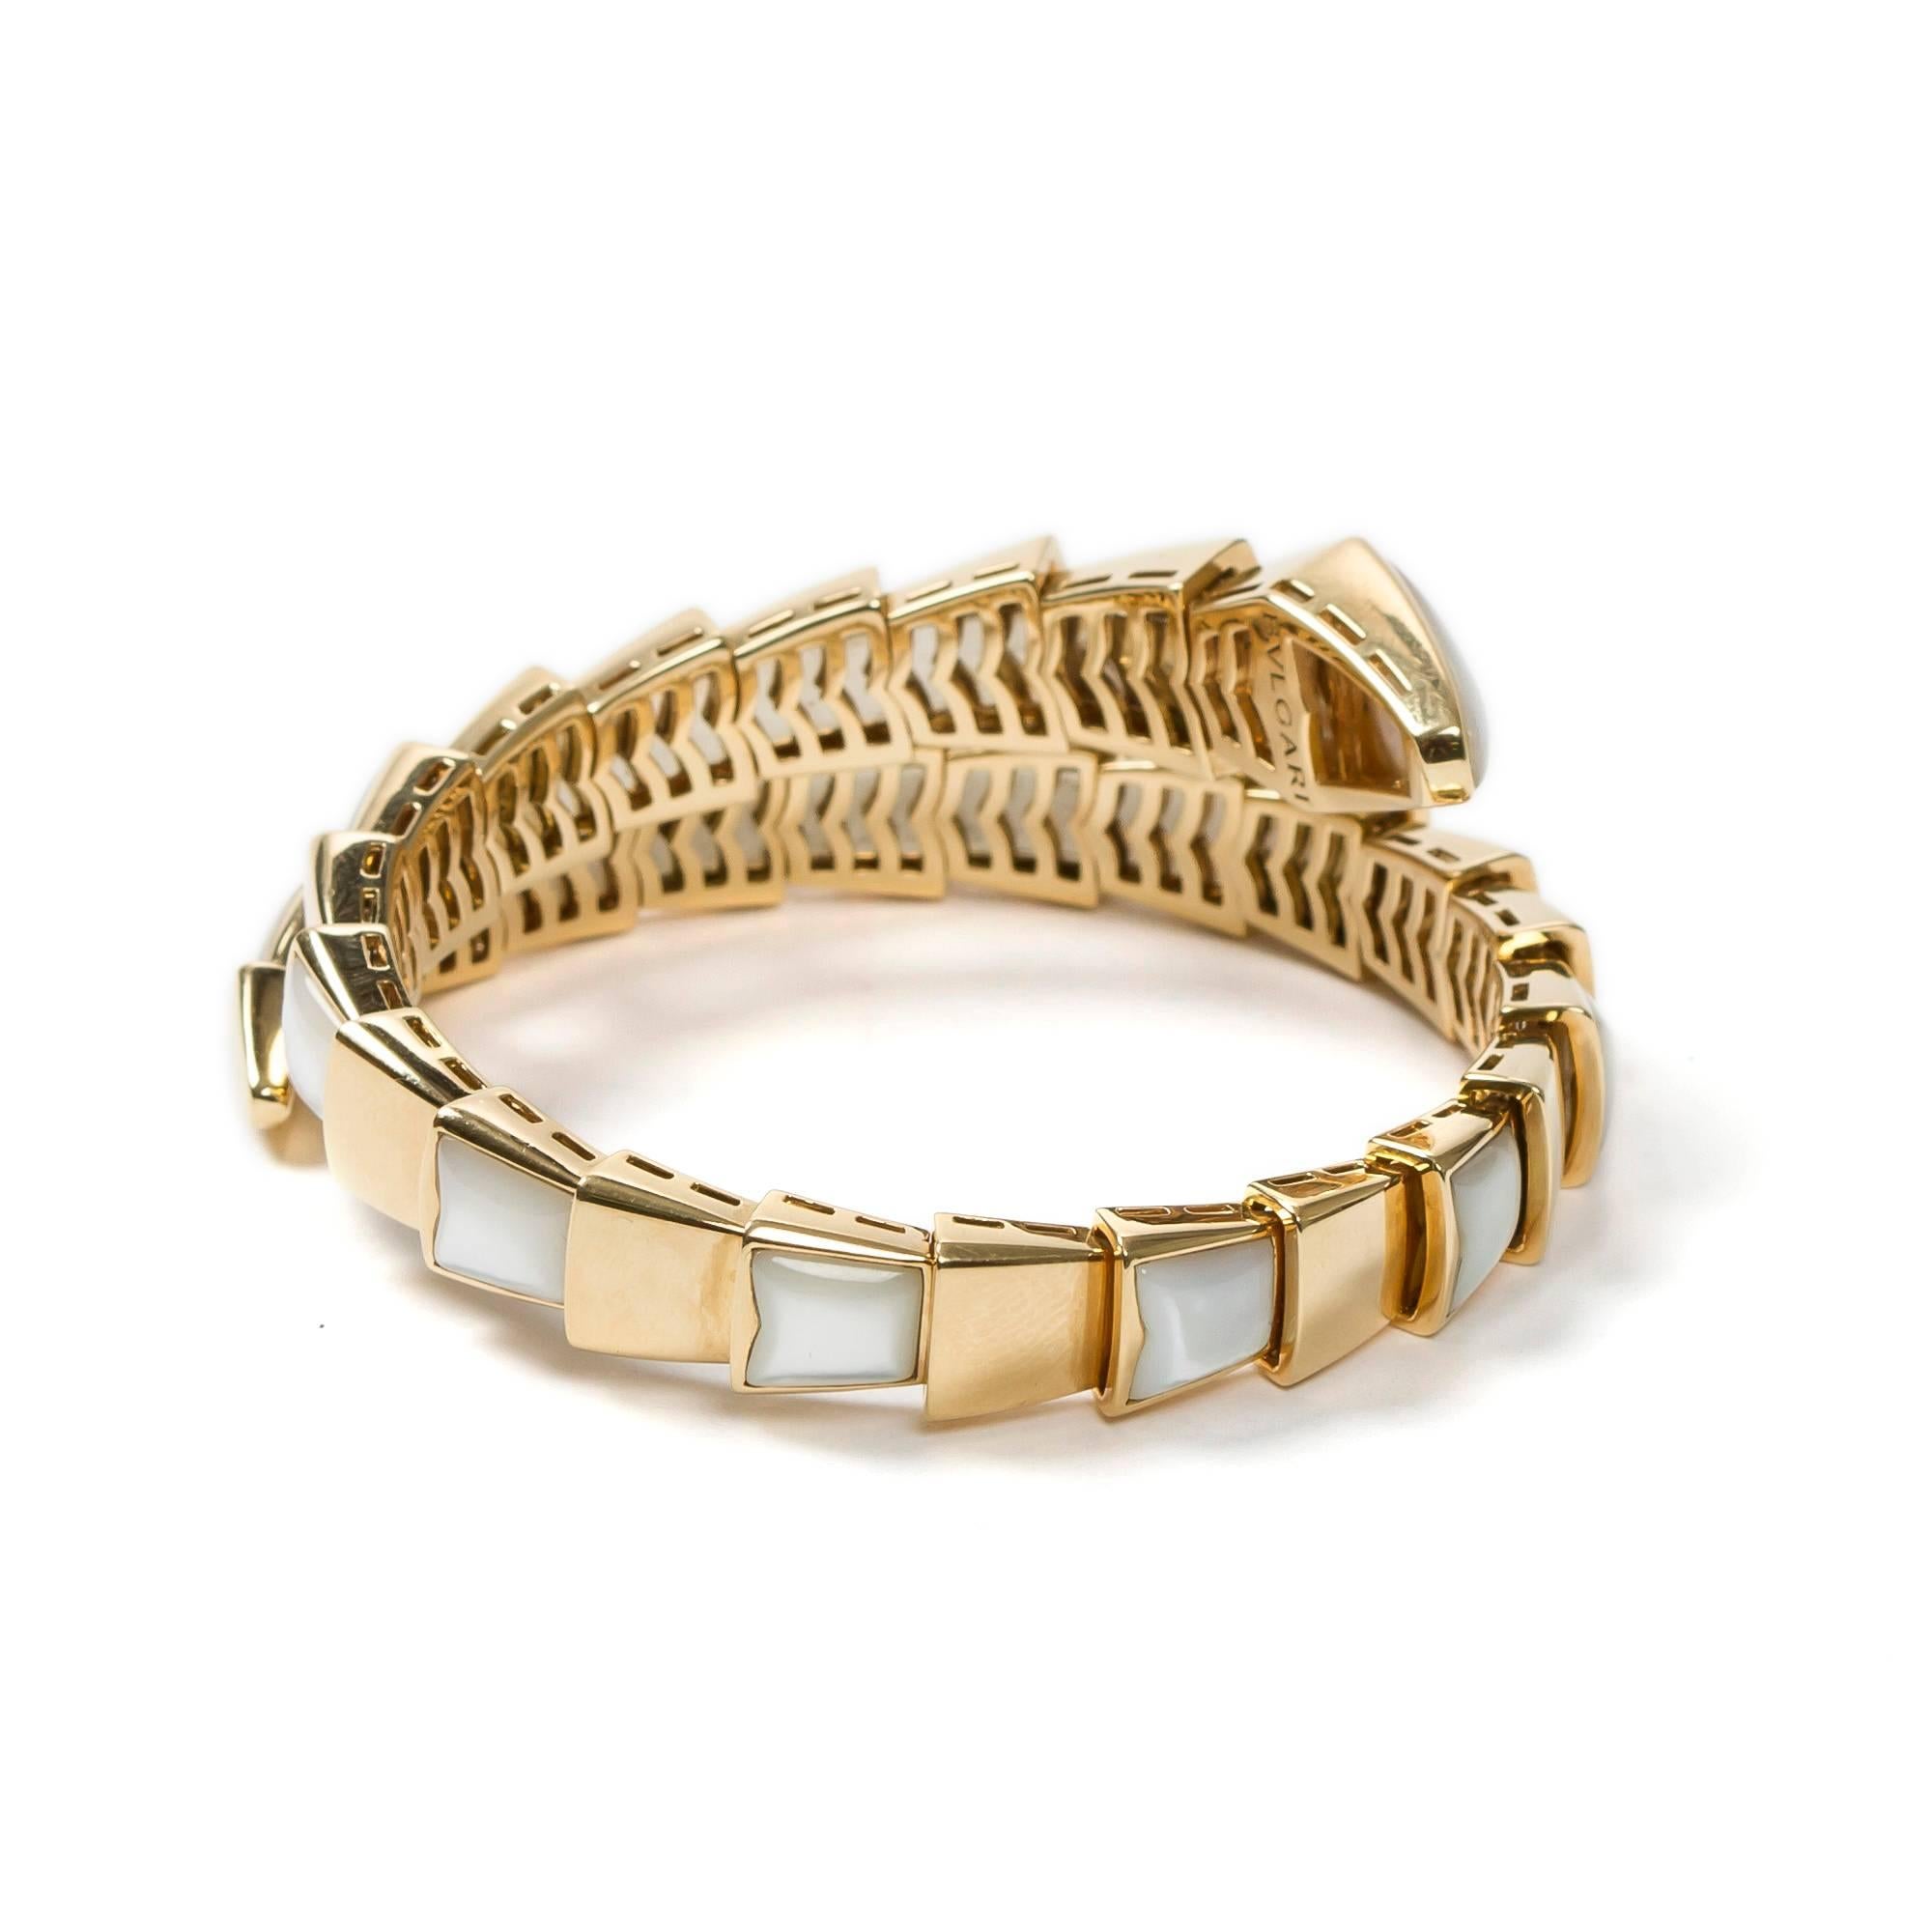 Serpenti bangle in 750 yellow gold with mother of pearl accents. Hallmarks inside of the bracelet" Bulgari/Made in Italy/3696 AL/ AU 750". Diameter of 5.3cm. The bracelet is flexible. Total weight of 62,2g. Comes with its' original box.